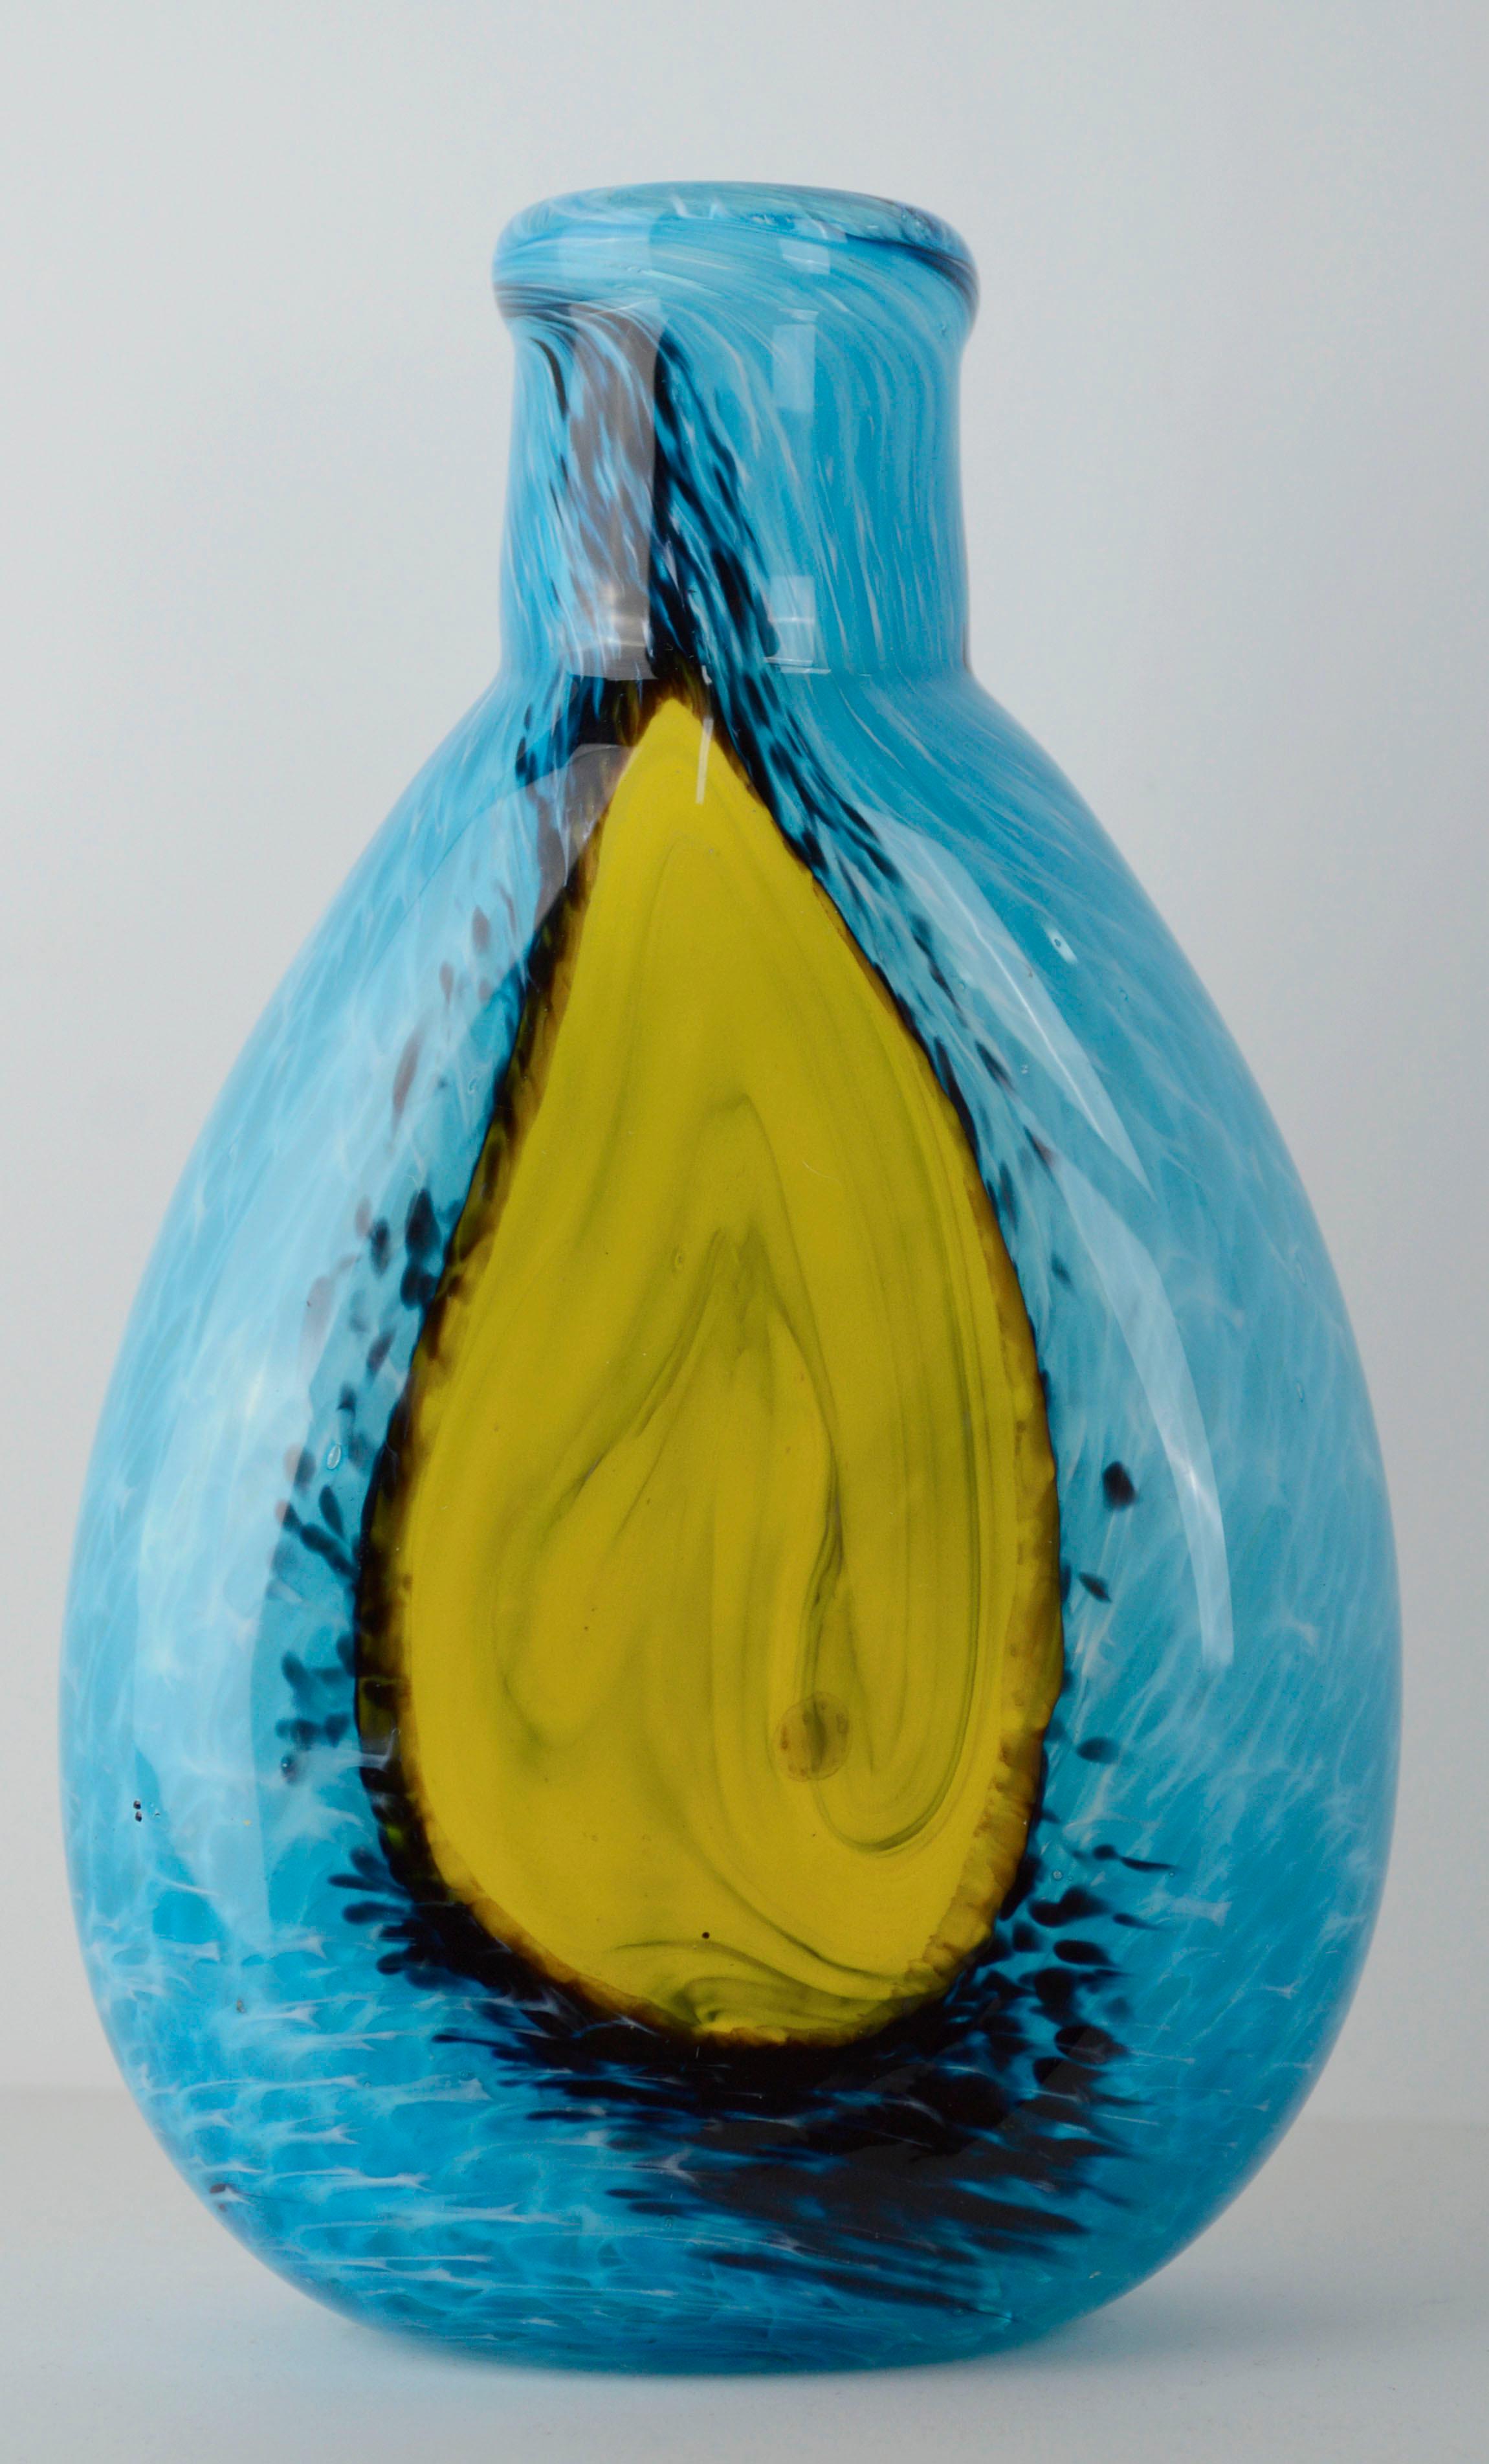 Modern Cyan Blue & Yellow Blown Glass Vase, Signed M. Saull

Vibrant cyan blue glass vase with yellow and black accents reminiscent of agate. Vase is hand blown and has an organic, slightly asymmetrical shape. Hand signed 